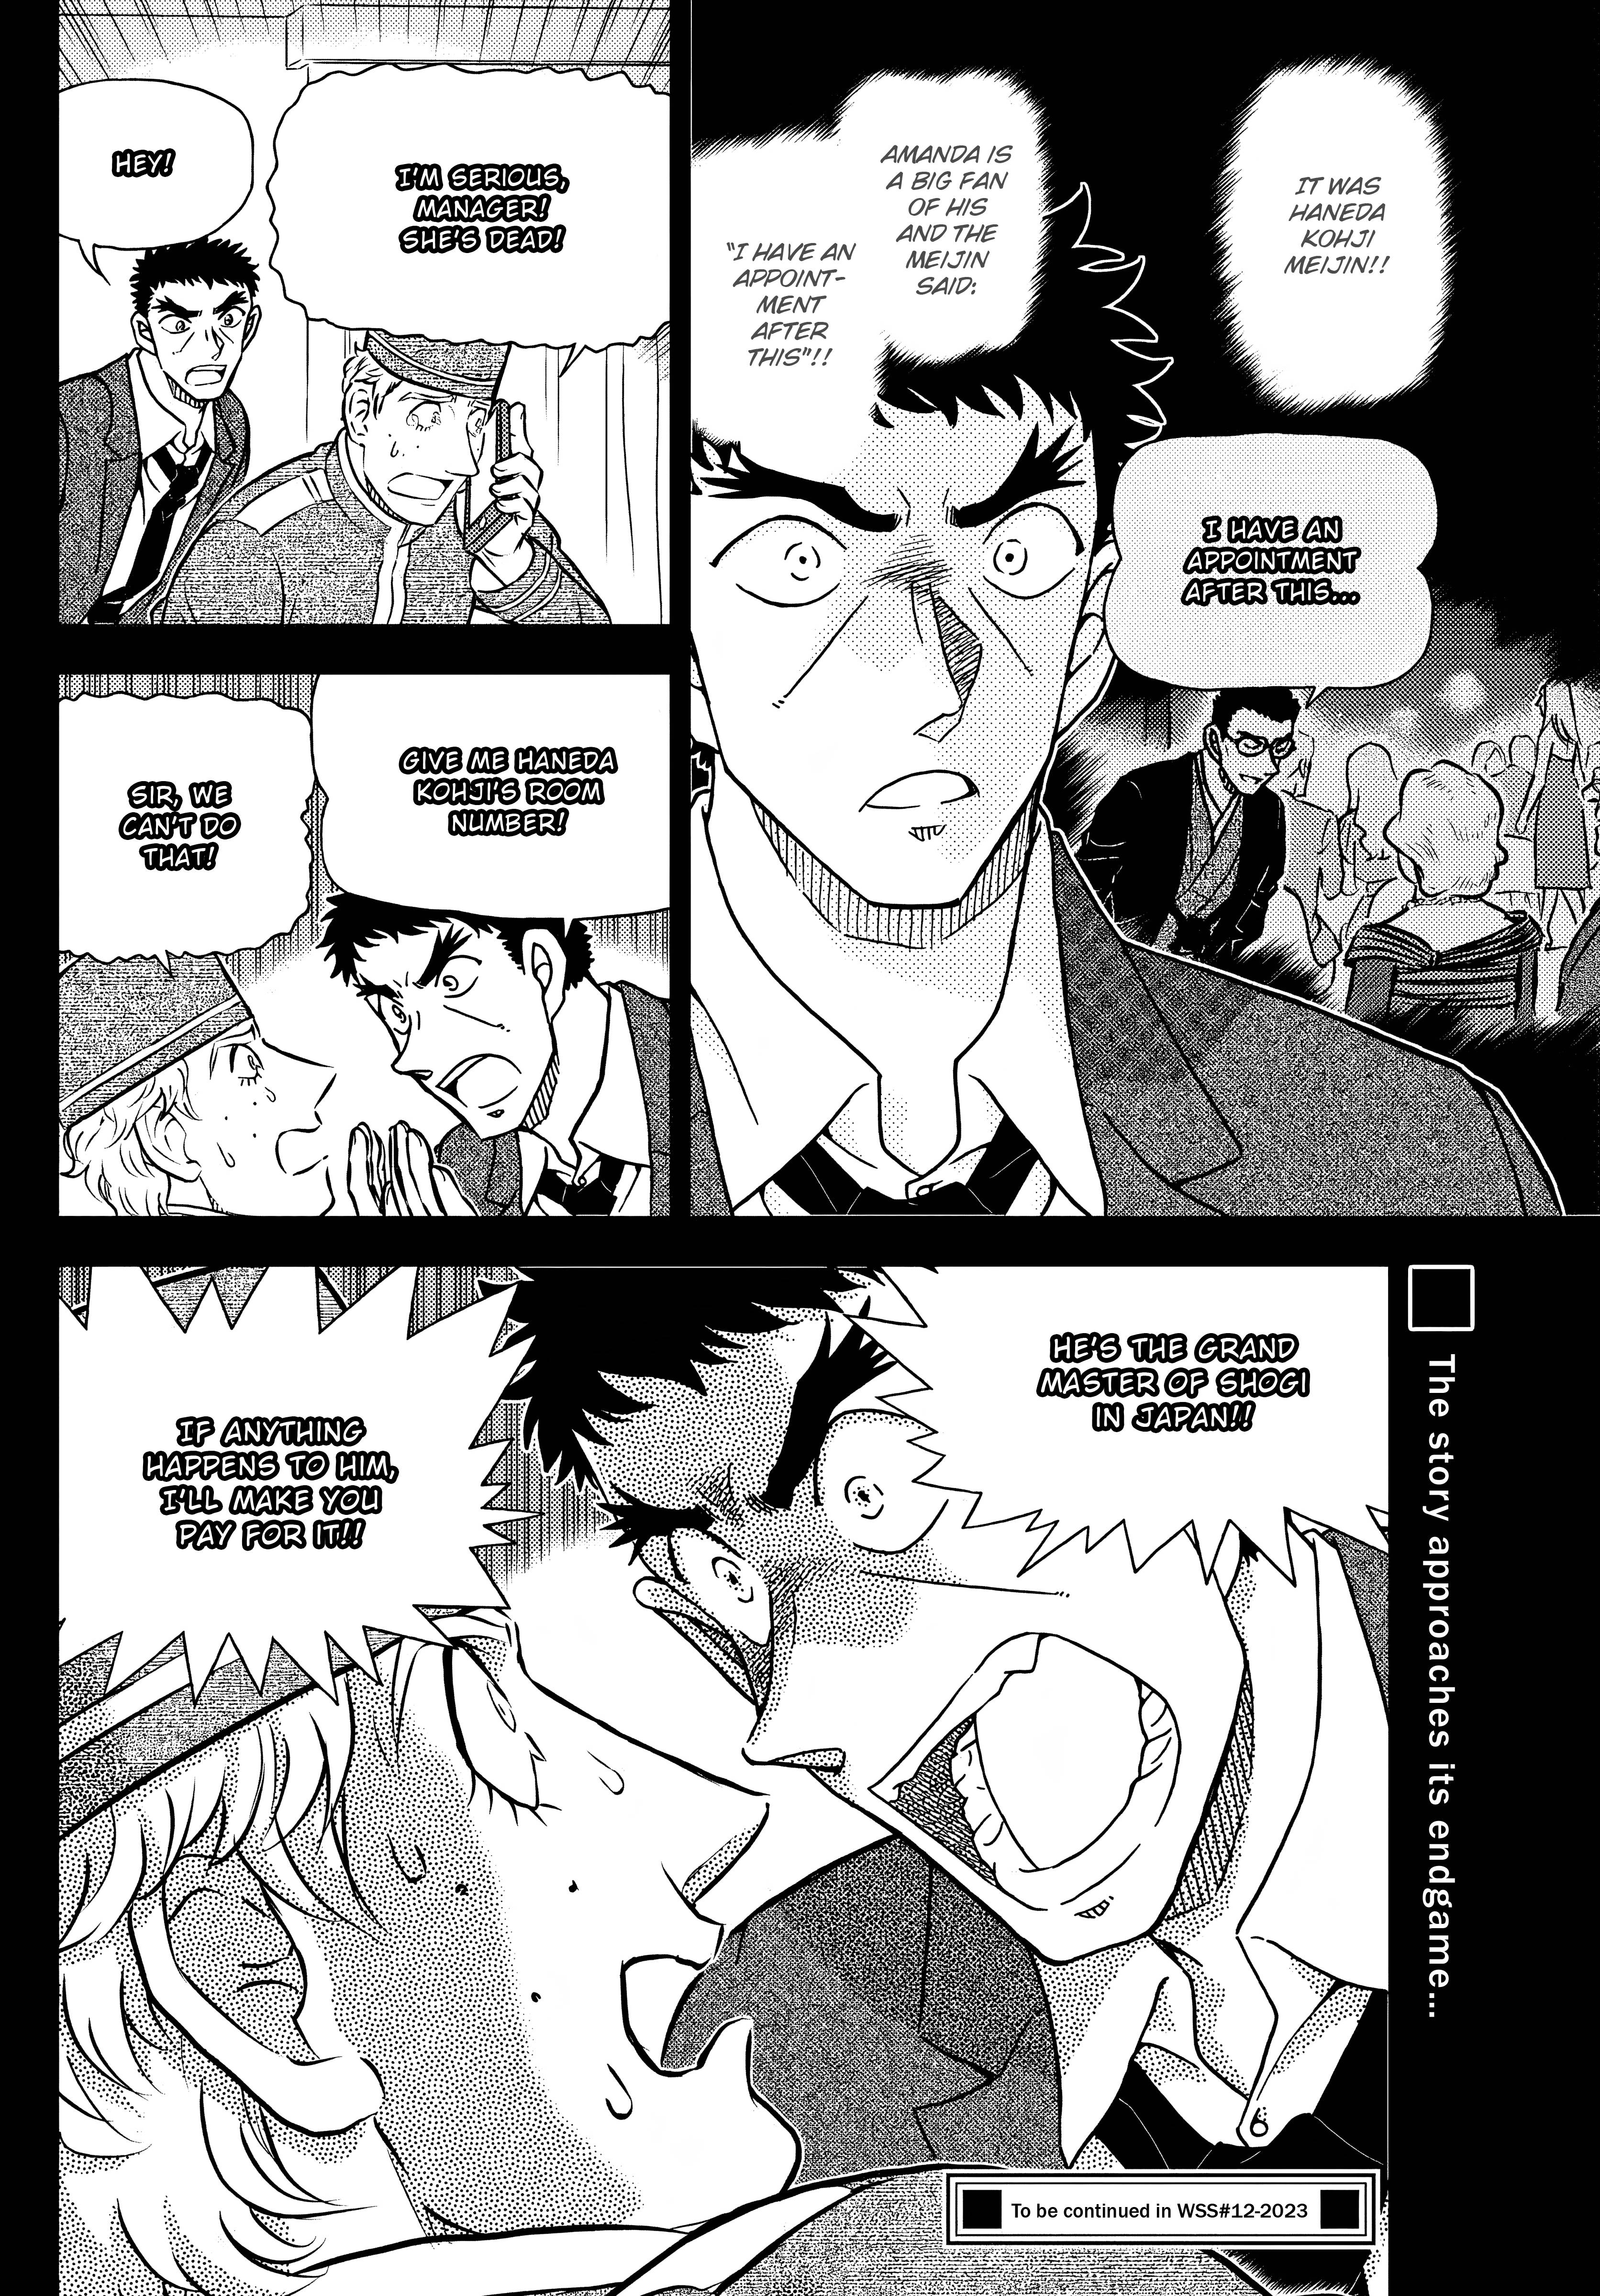 Detective Conan chapter 1107 page 16